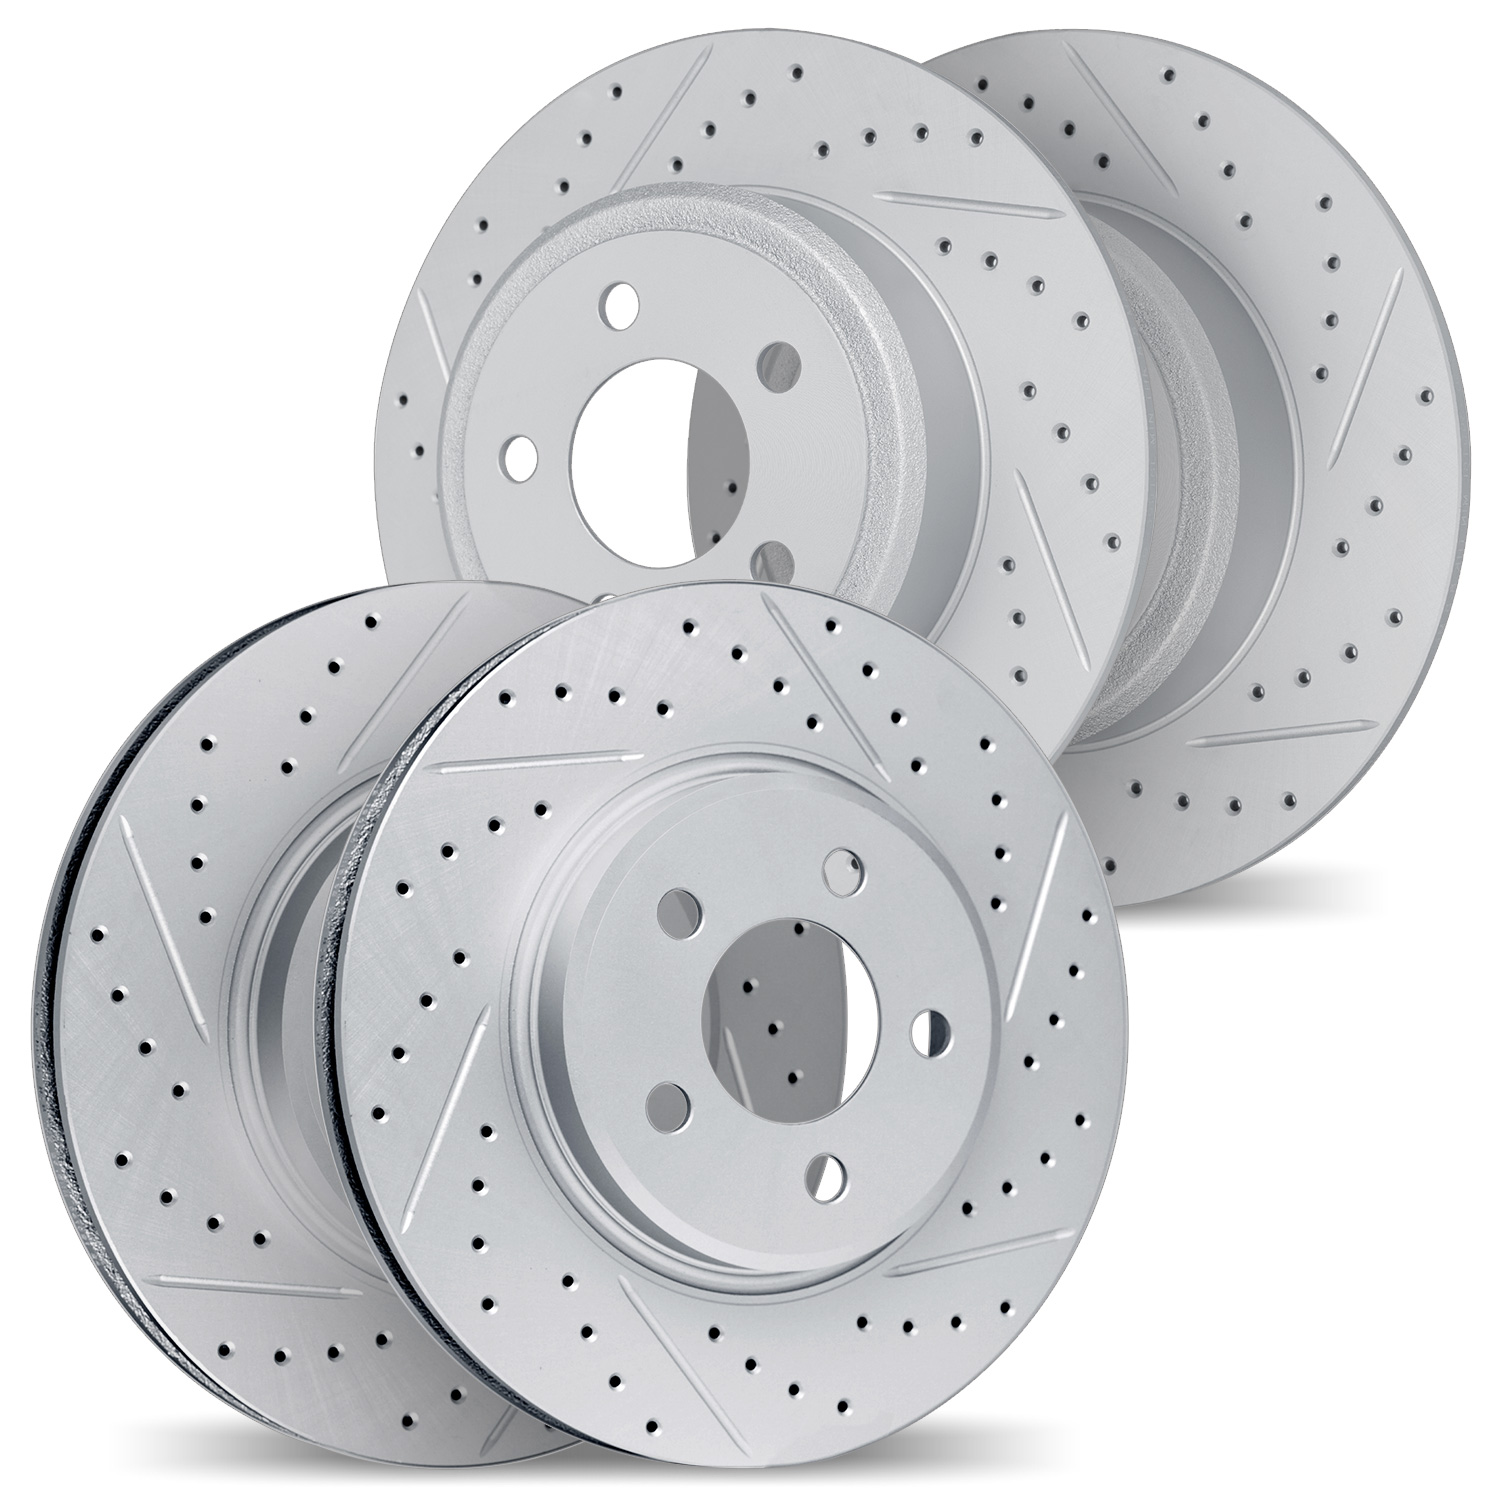 2004-03039 Geoperformance Drilled/Slotted Brake Rotors, 2007-2009 Kia/Hyundai/Genesis, Position: Front and Rear